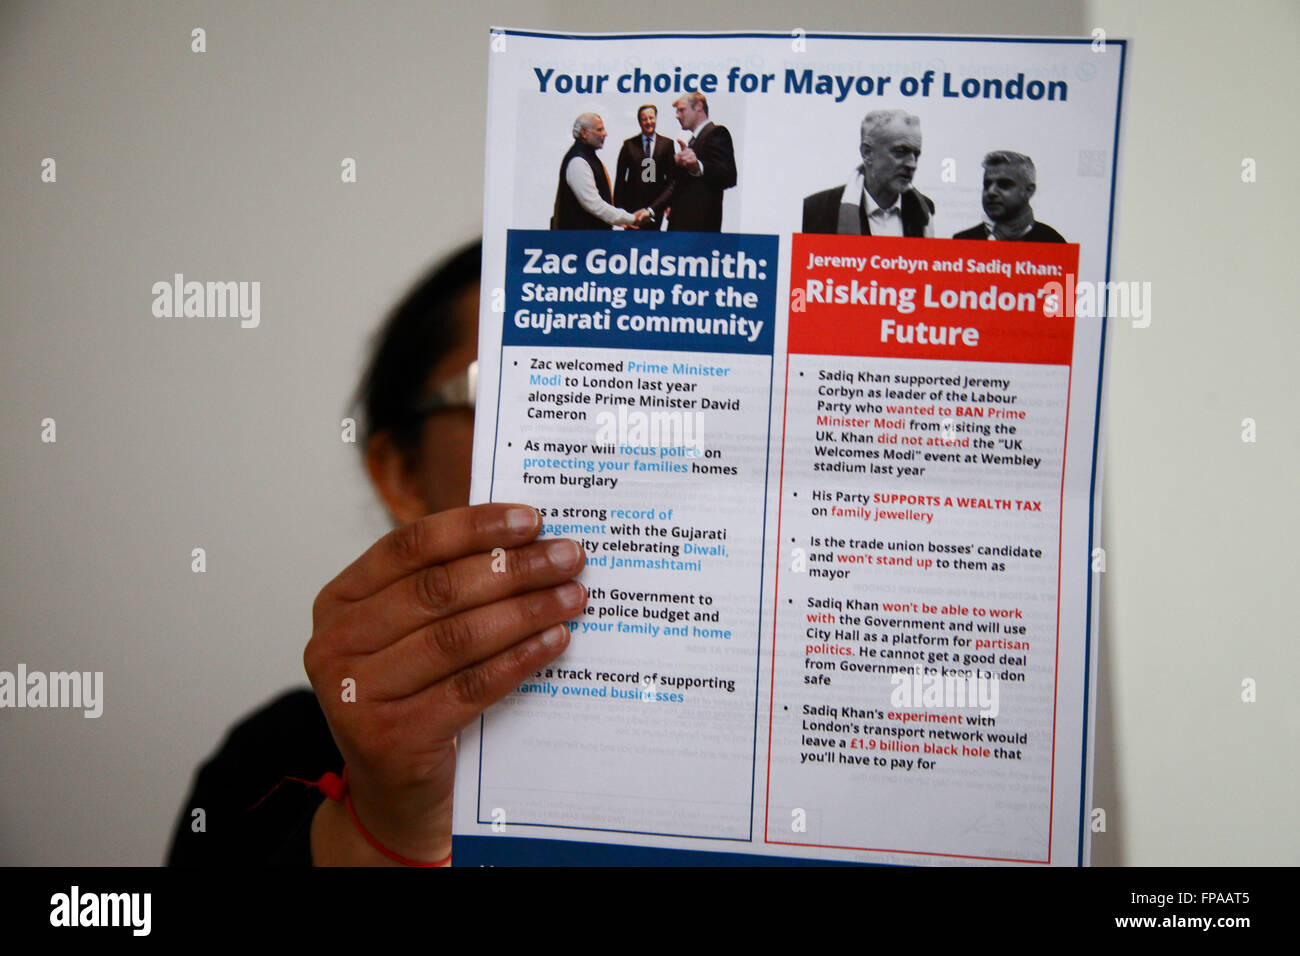 London, UK 18 March 2016 - Conservative candidate for London mayor, Zac Goldsmith targetting minority ethnic voters by sending letters to London Gujarati Indian community, warning them a vote for Sadiq Khan would put their family heirlooms at risk. © Dinendra Haria/Alamy Live News Stock Photo